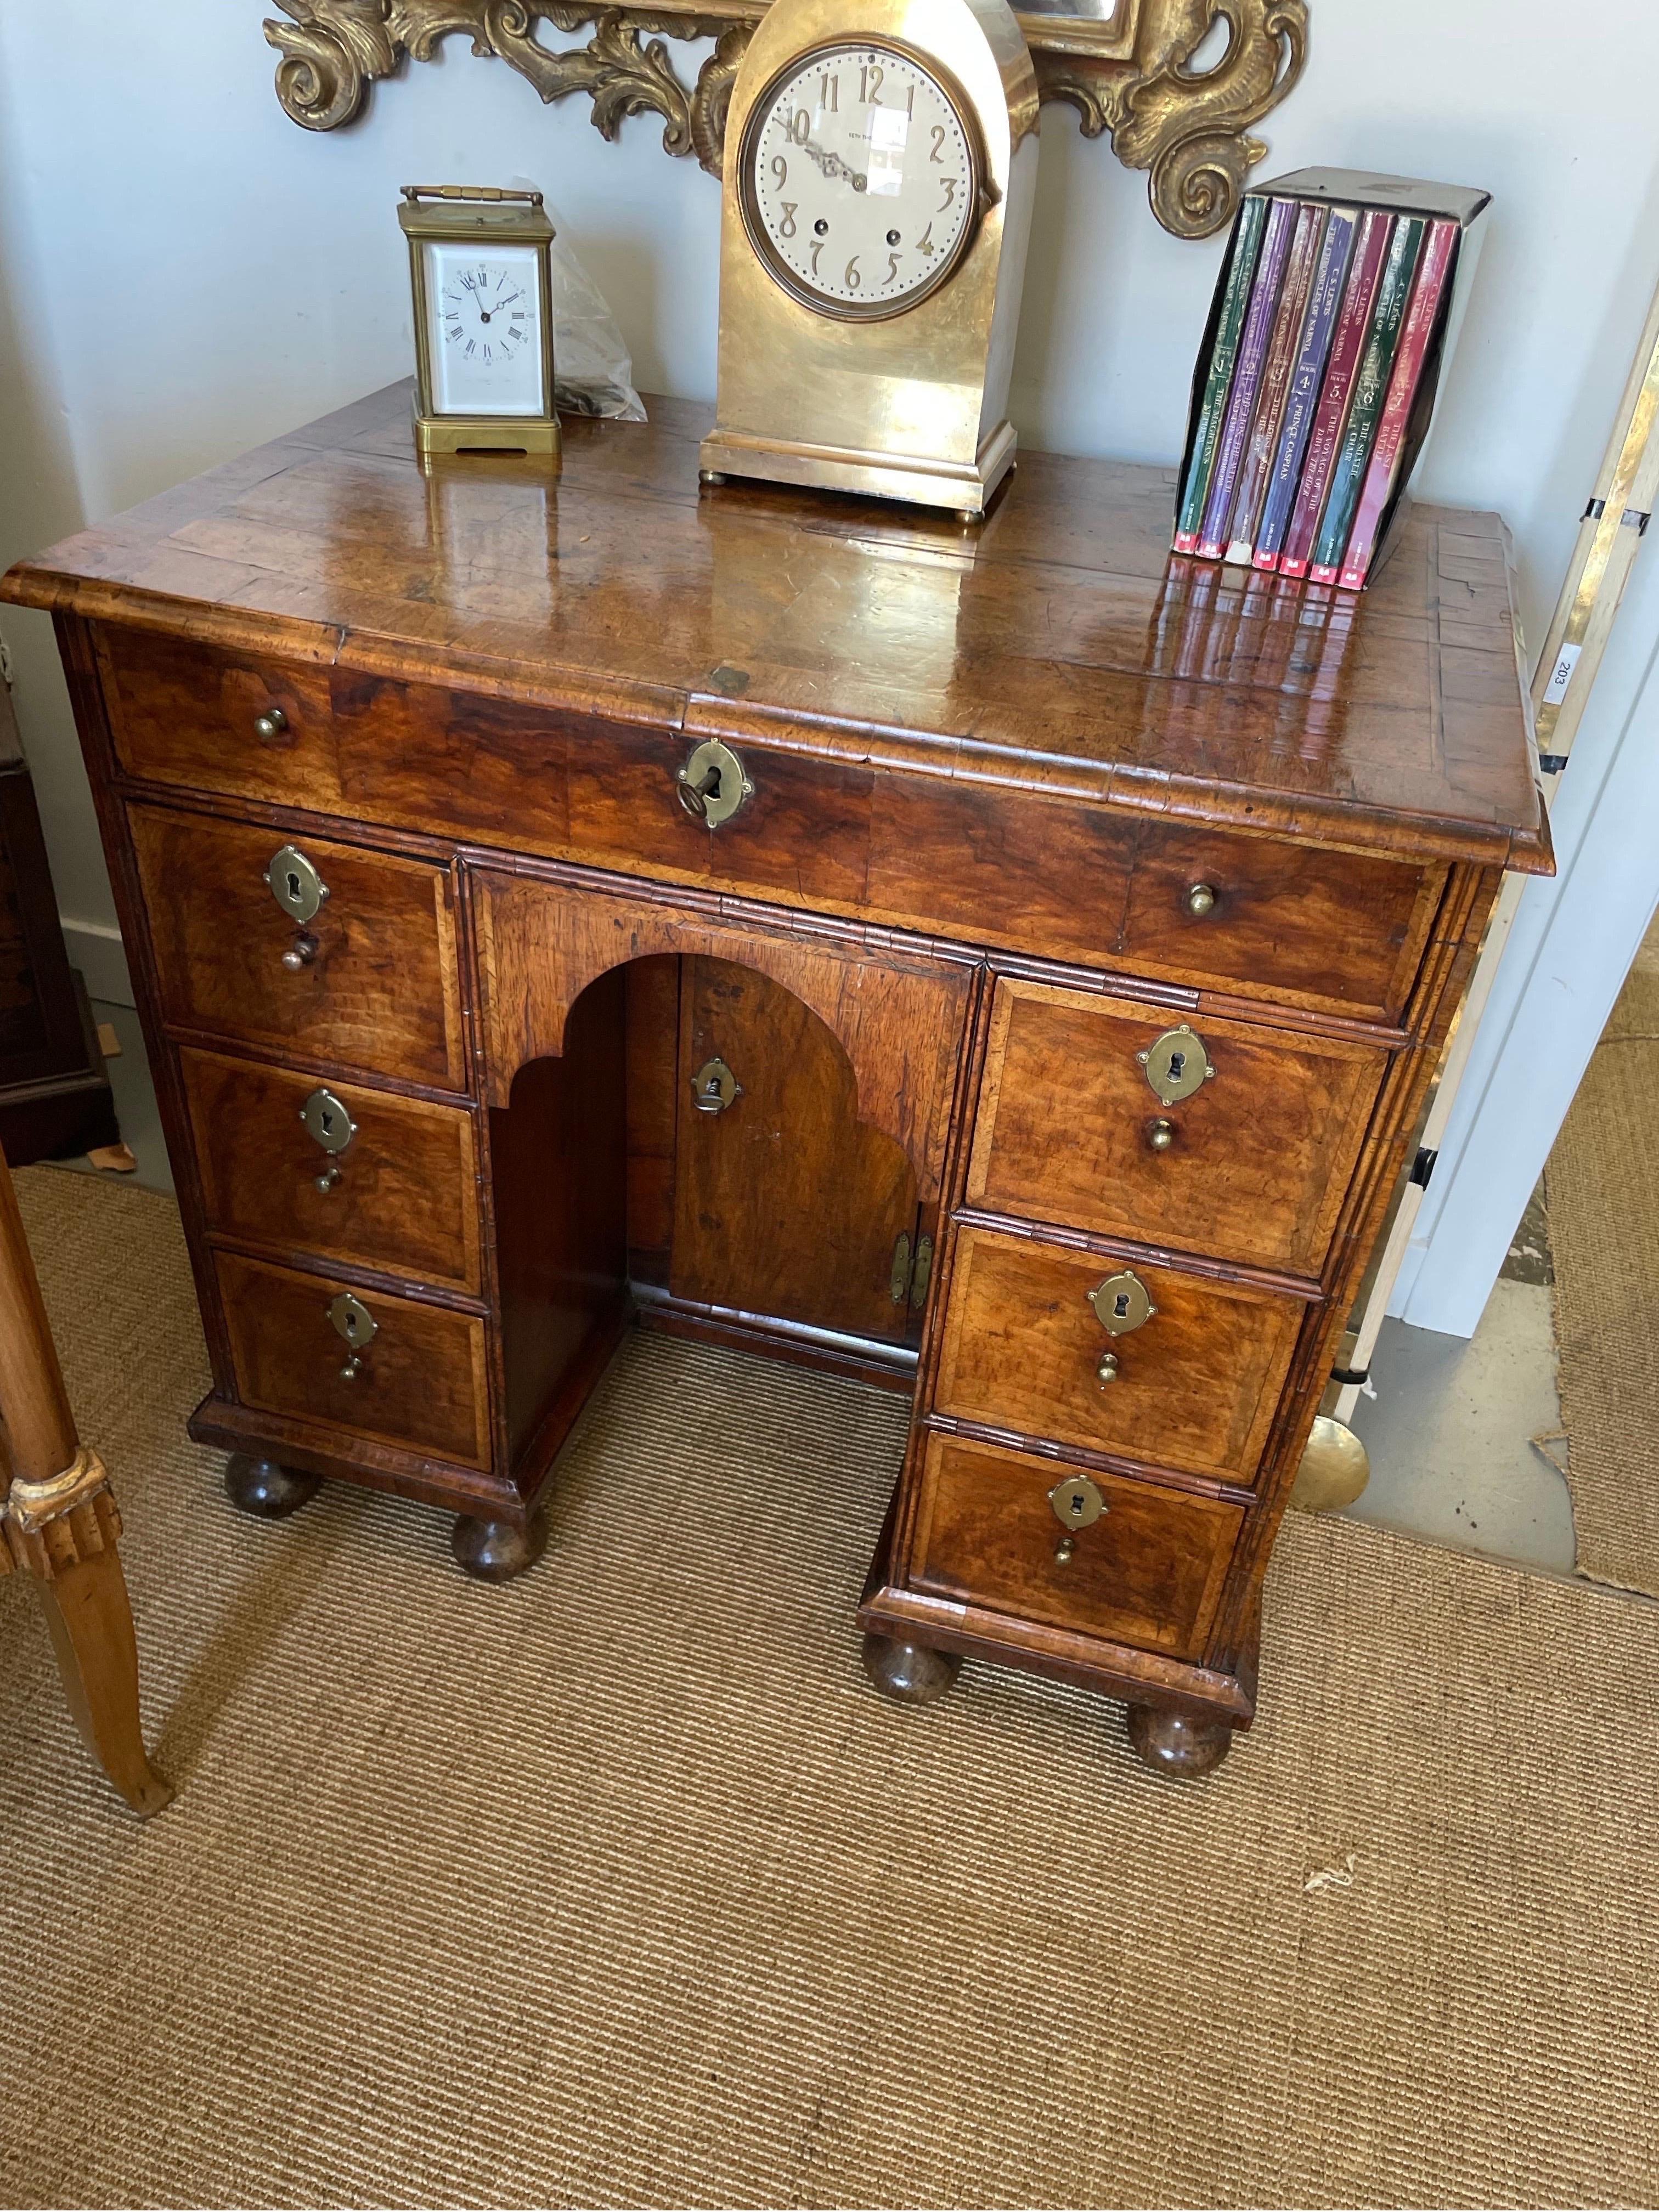 Lovely quality period piece with excellent colour and patination original hardware 